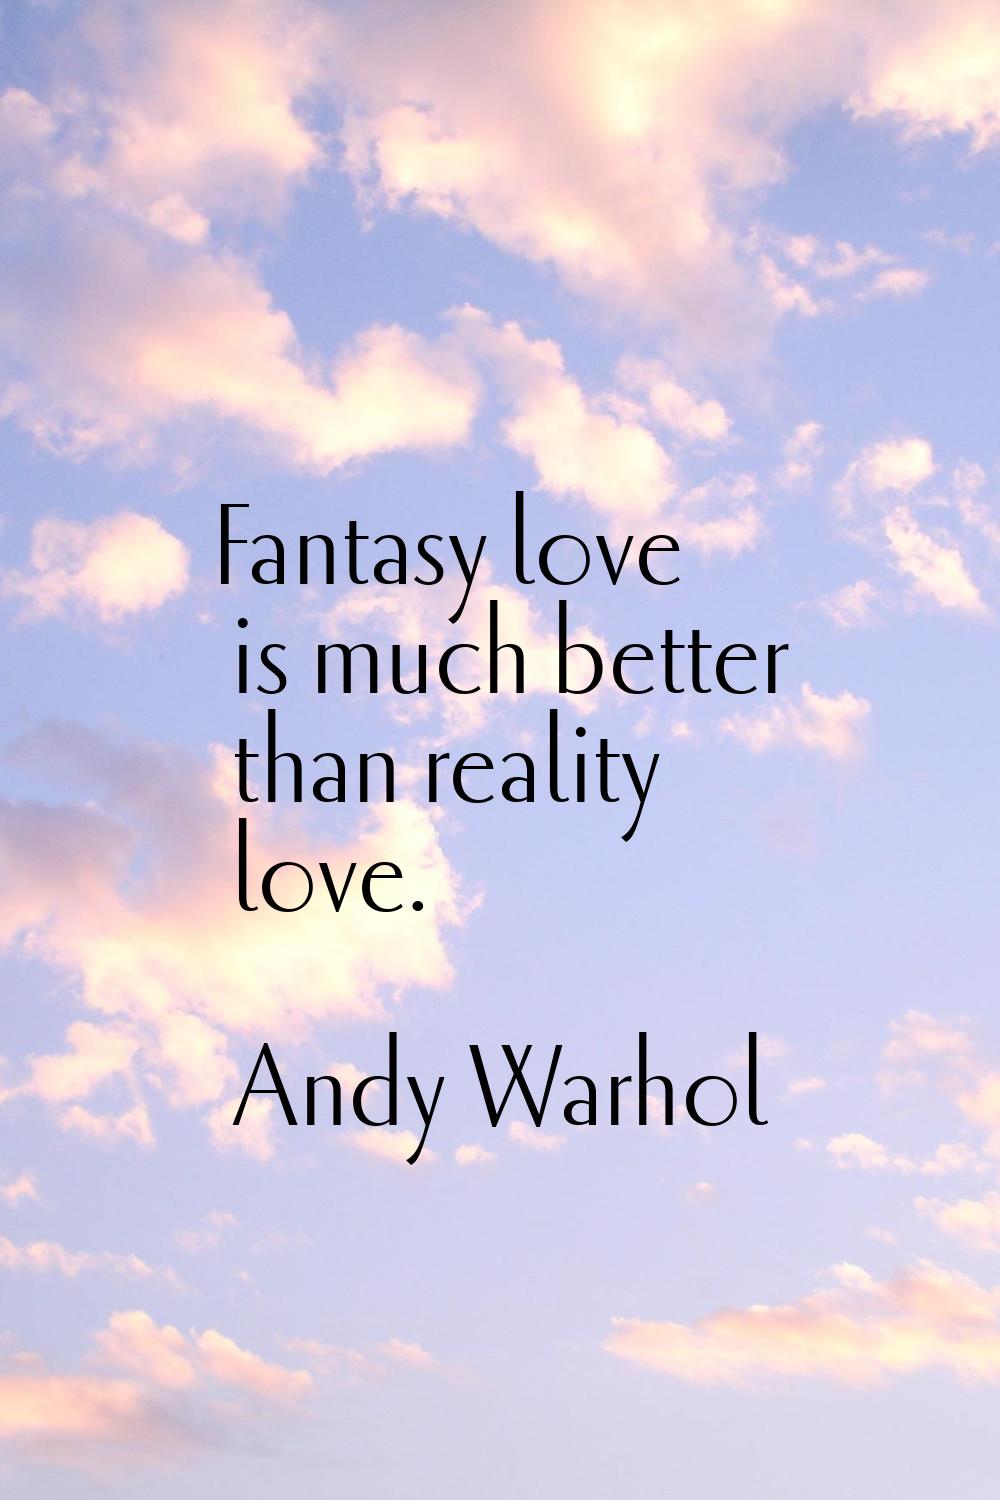 Fantasy love is much better than reality love.